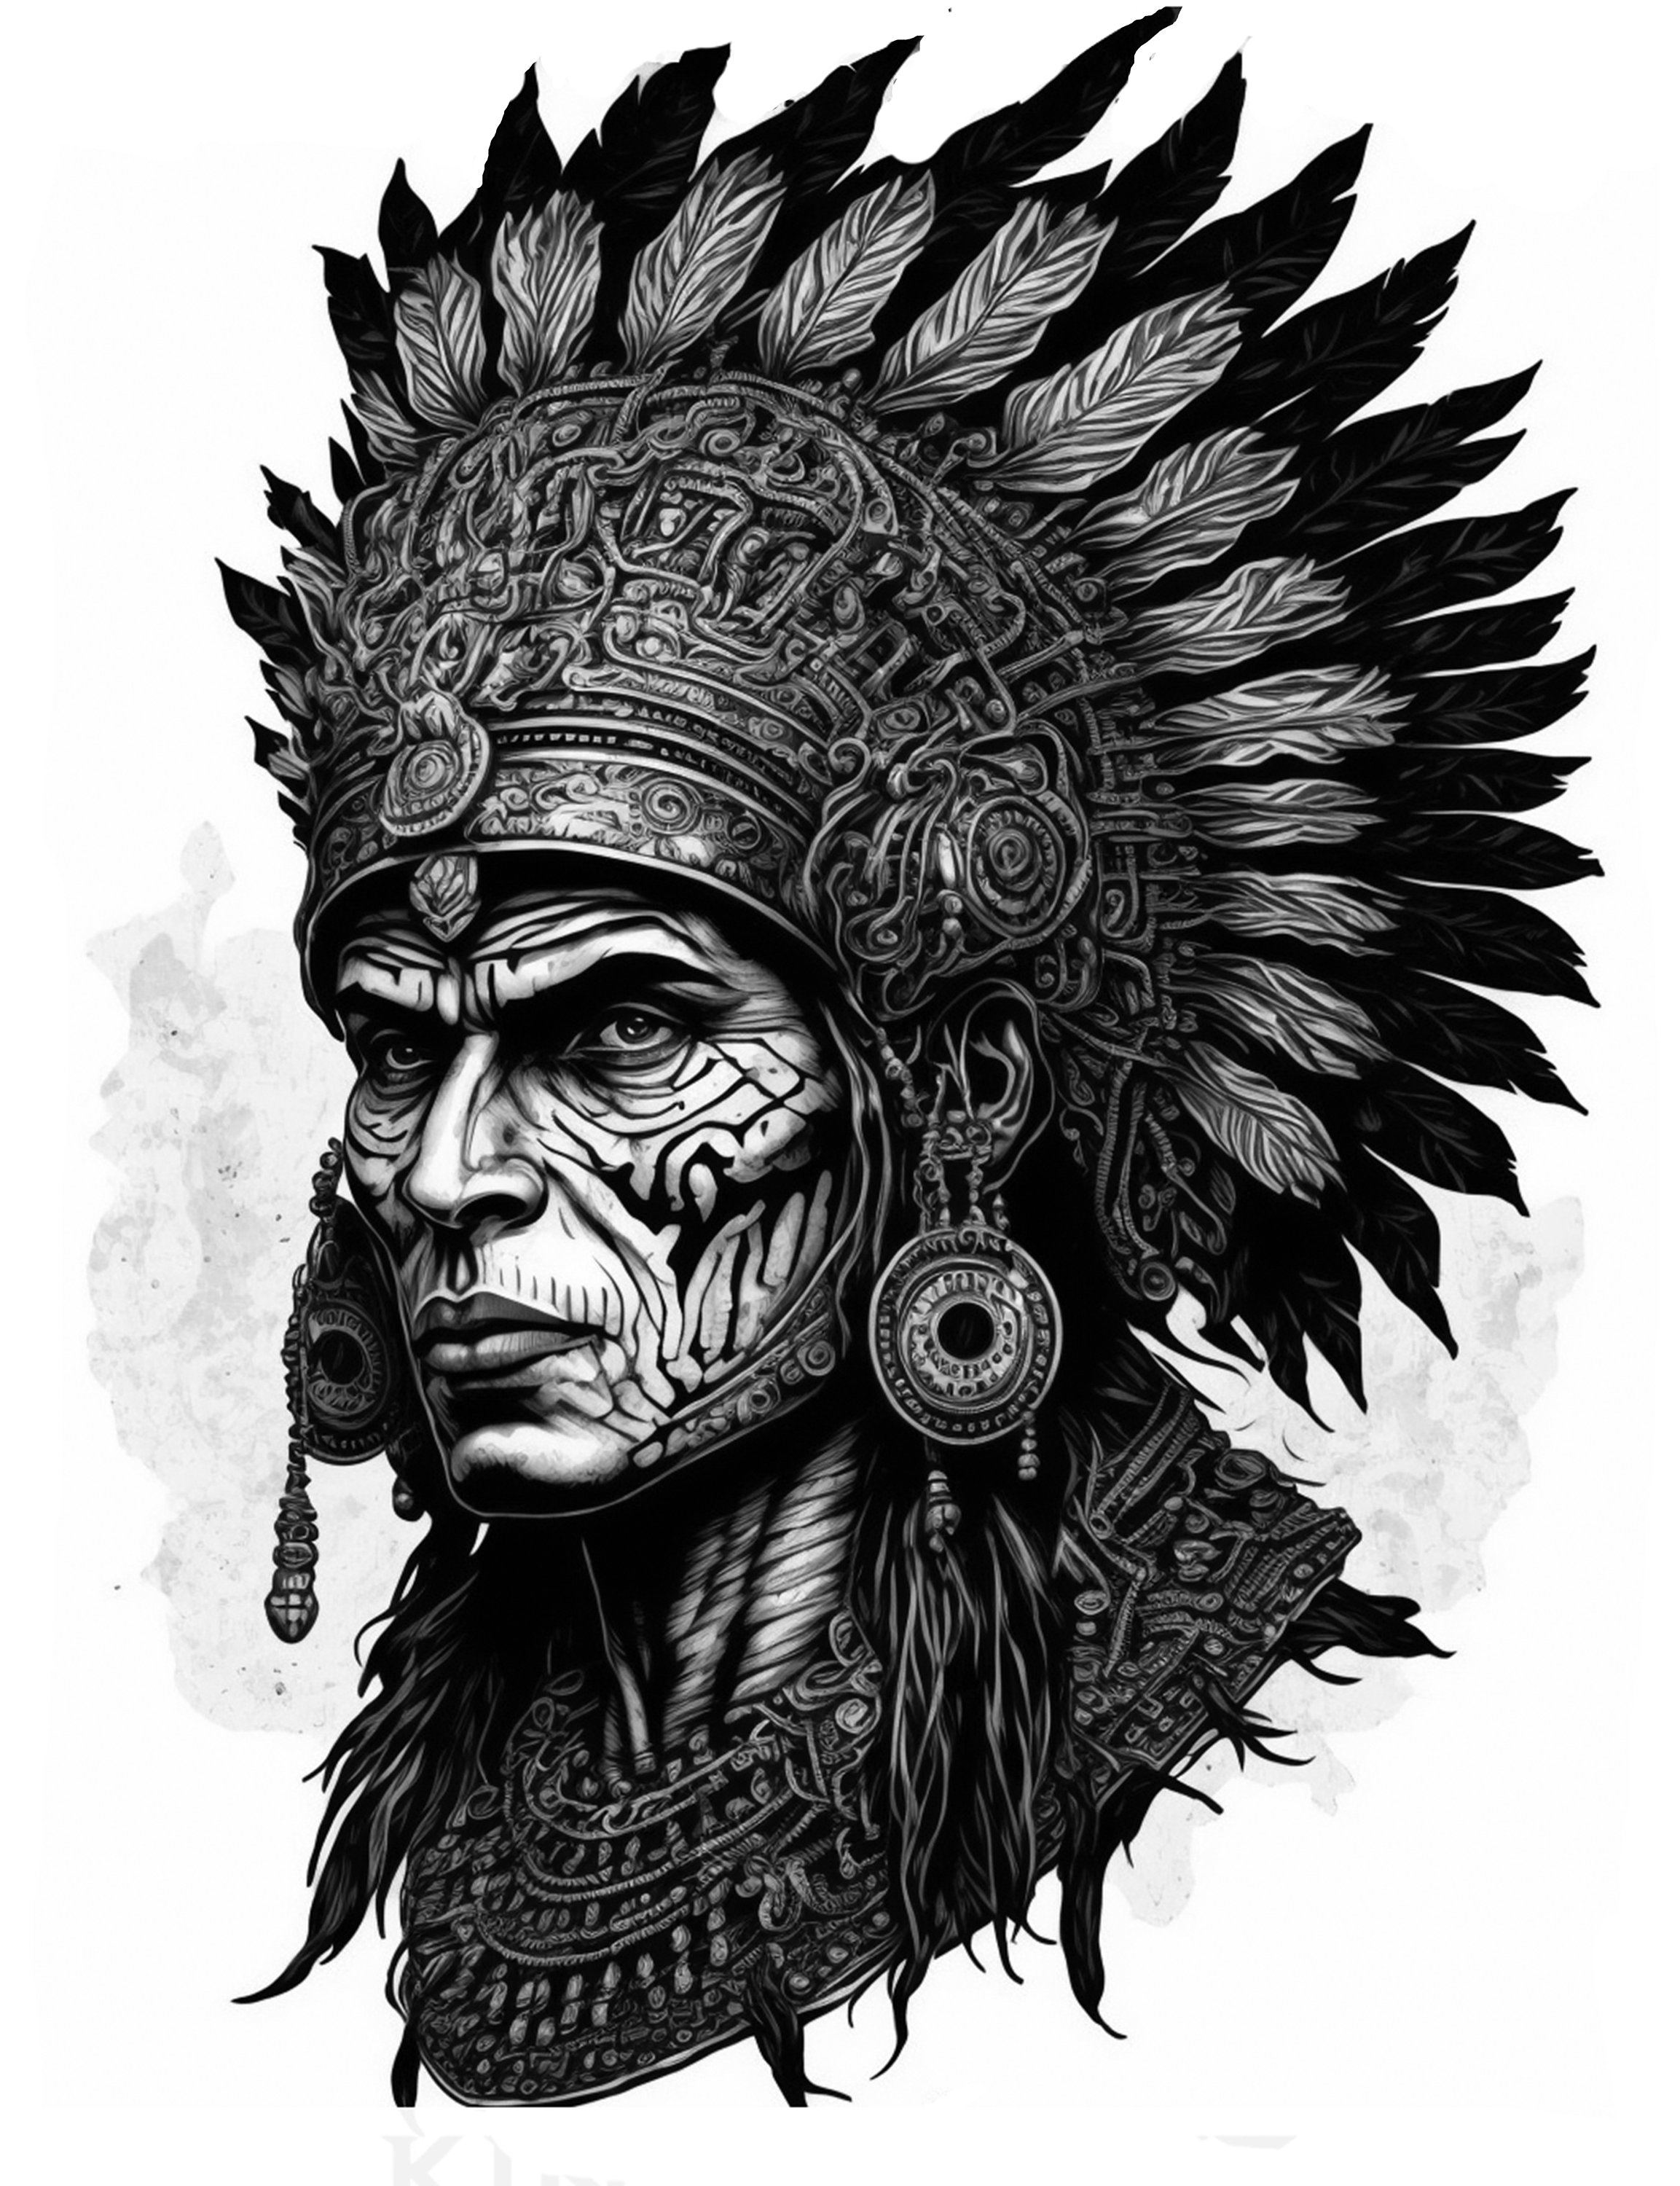 85 Mind-Blowing Aztec Tattoos And Their Meaning - AuthorityTattoo